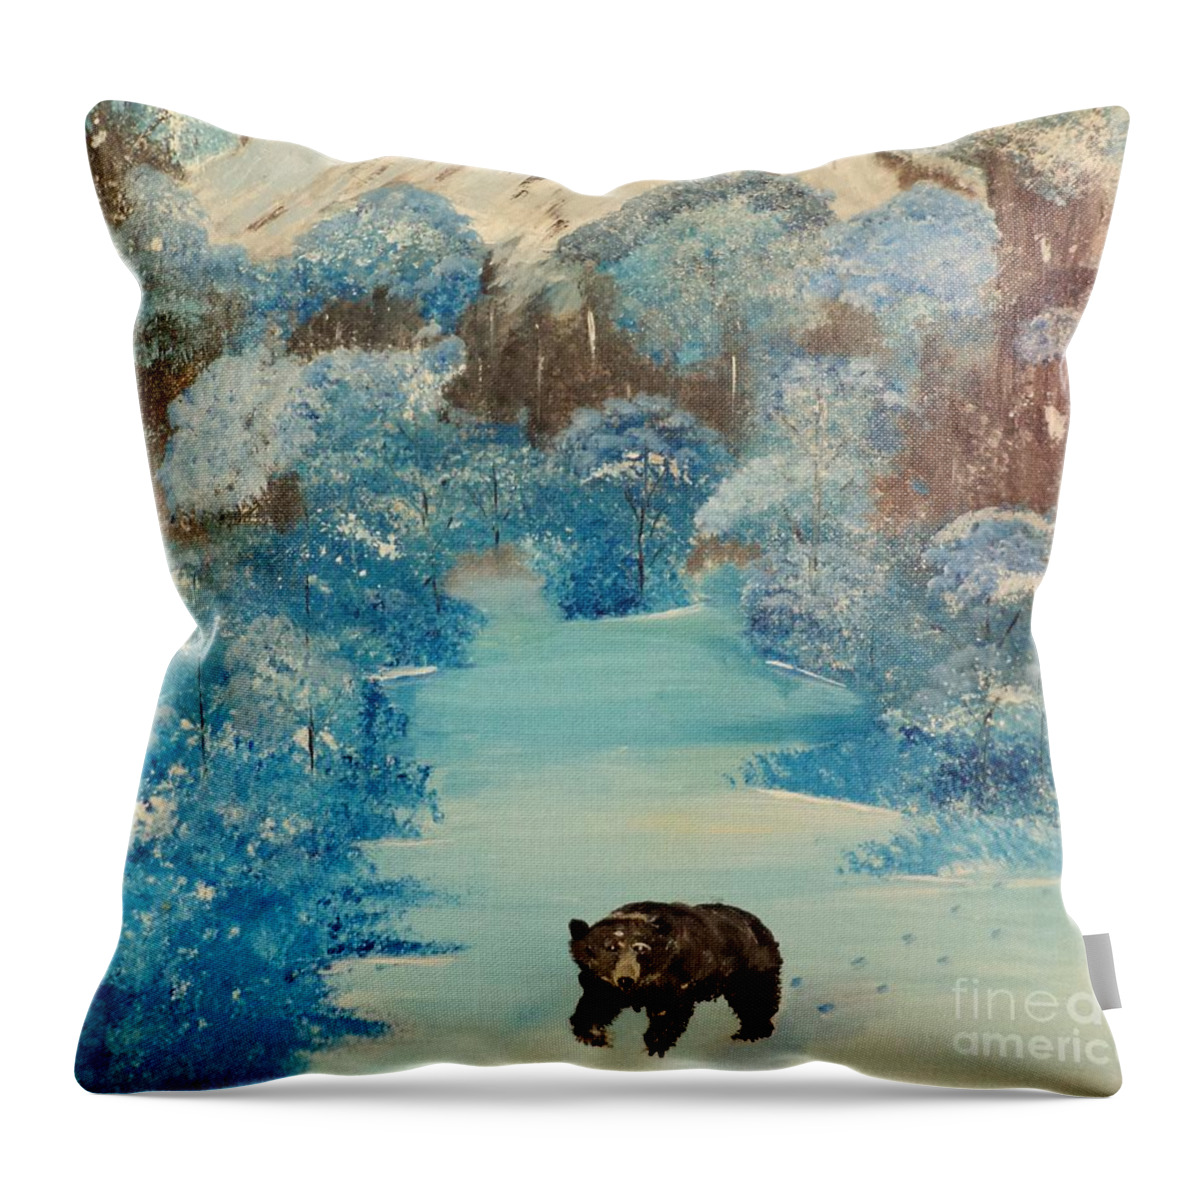 Donnsart1 Throw Pillow featuring the painting Blue Mountain Bear Painting # 278 by Donald Northup